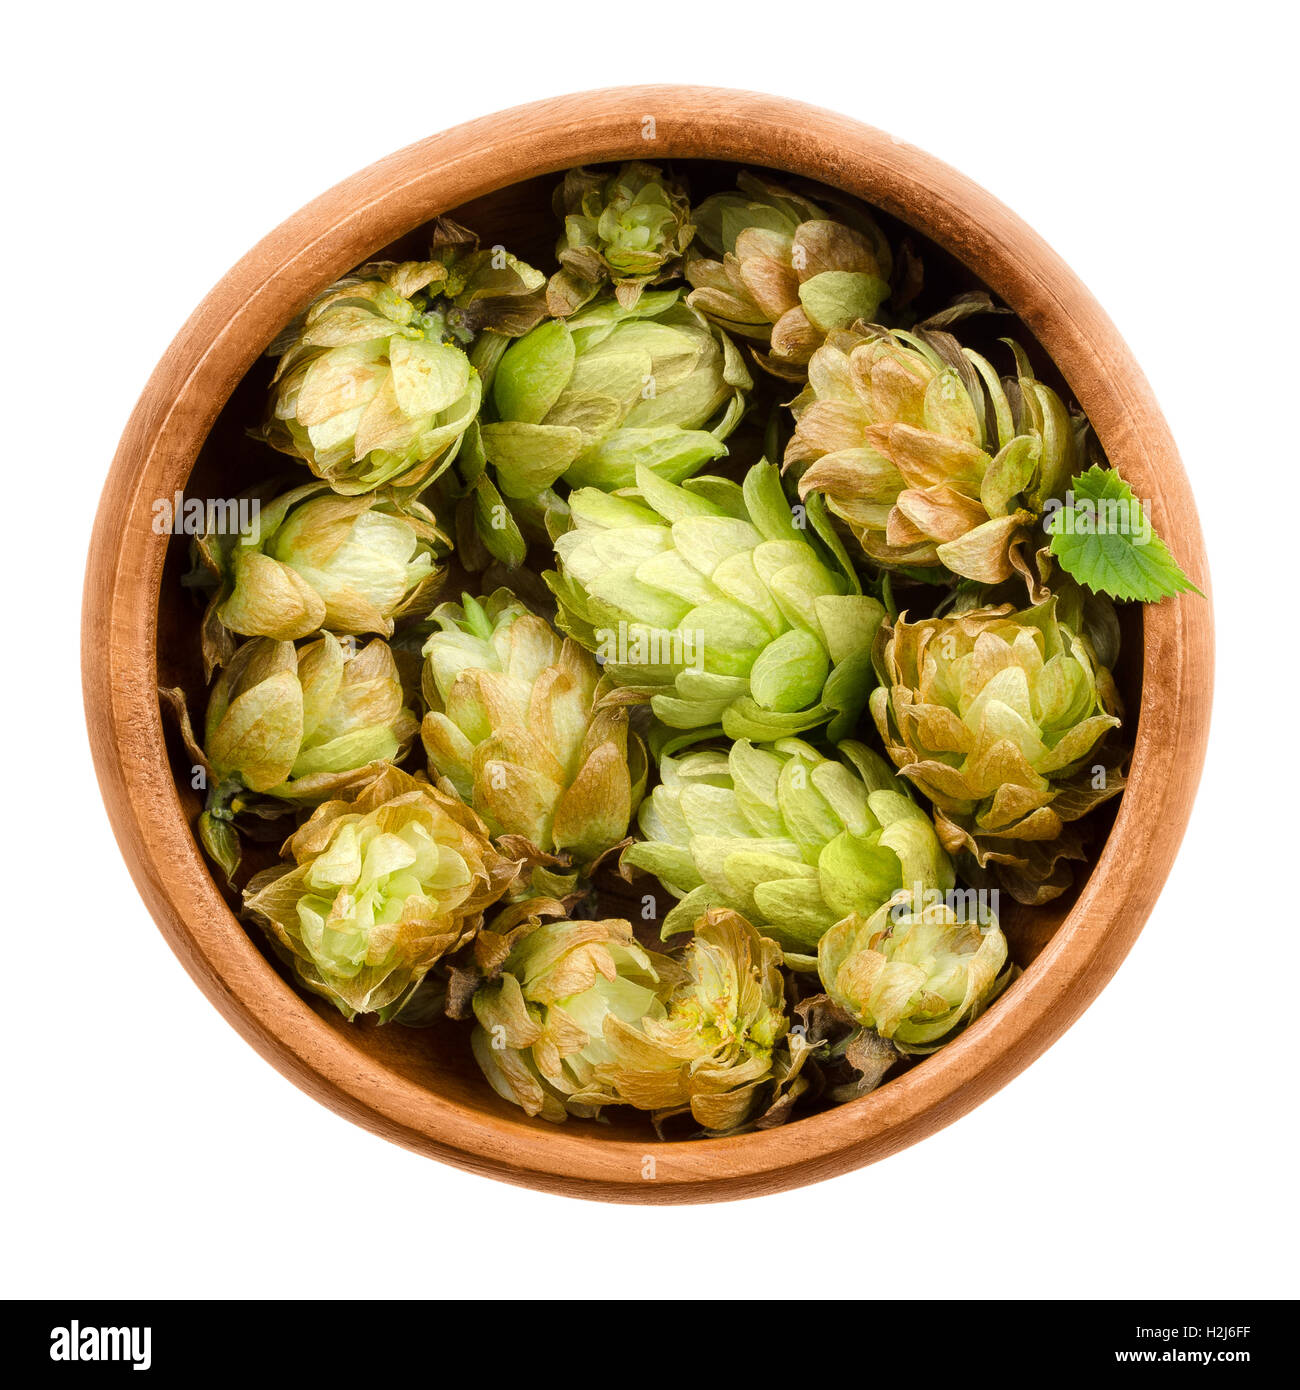 Hops in wooden bowl on white background. Half dried seed cones from the hop plant, Humulus lupulus. Stock Photo